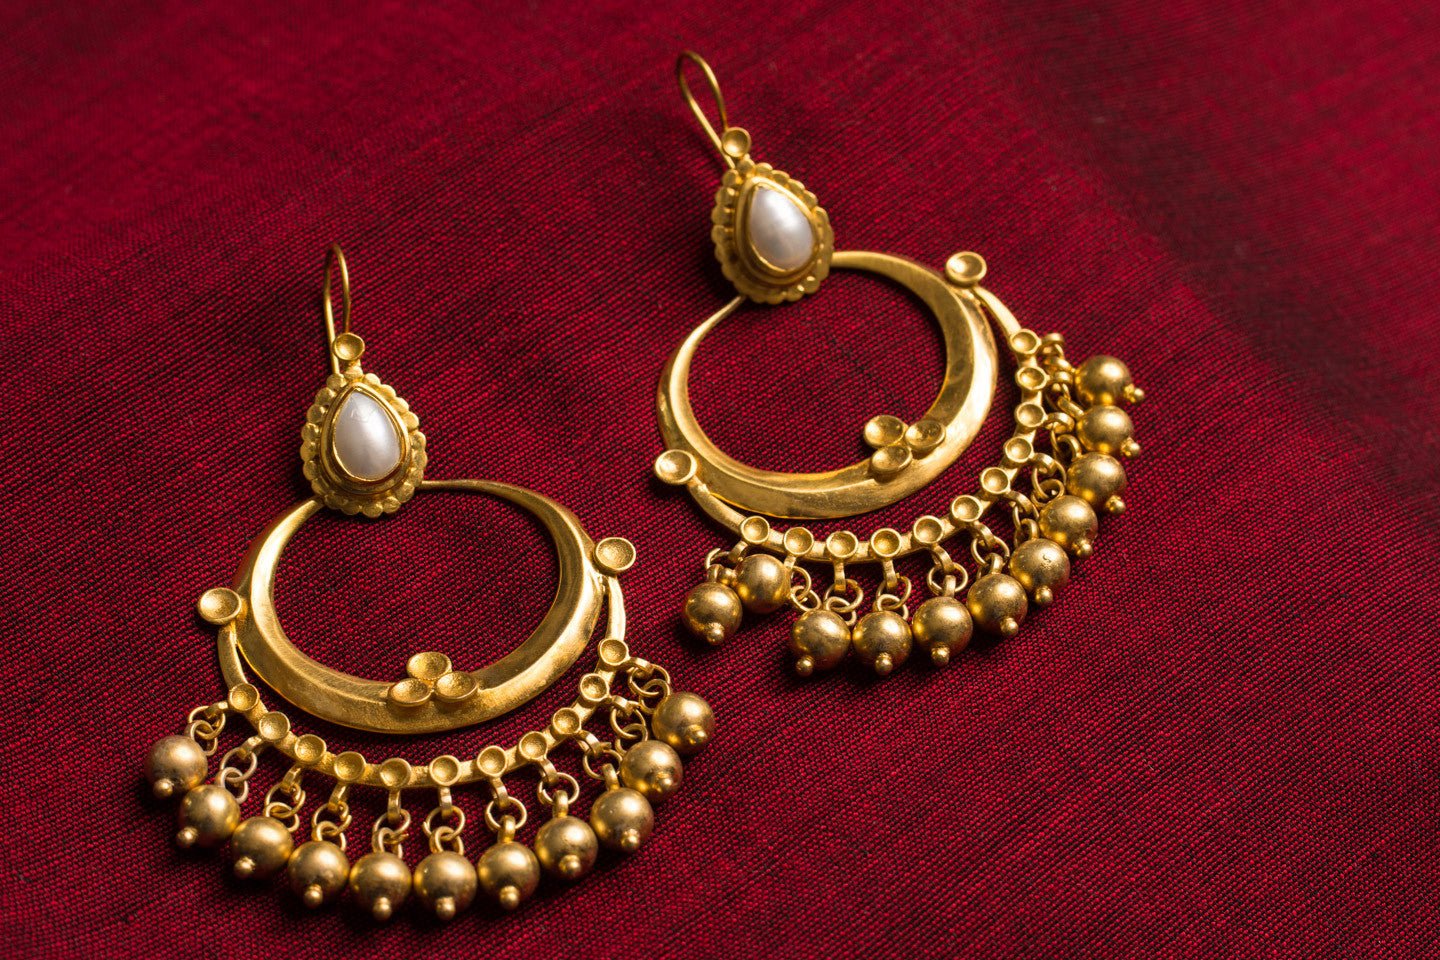 20a443-silver-gold-plated-amrapali-earrings-pearl-bead-drop-alternate-view